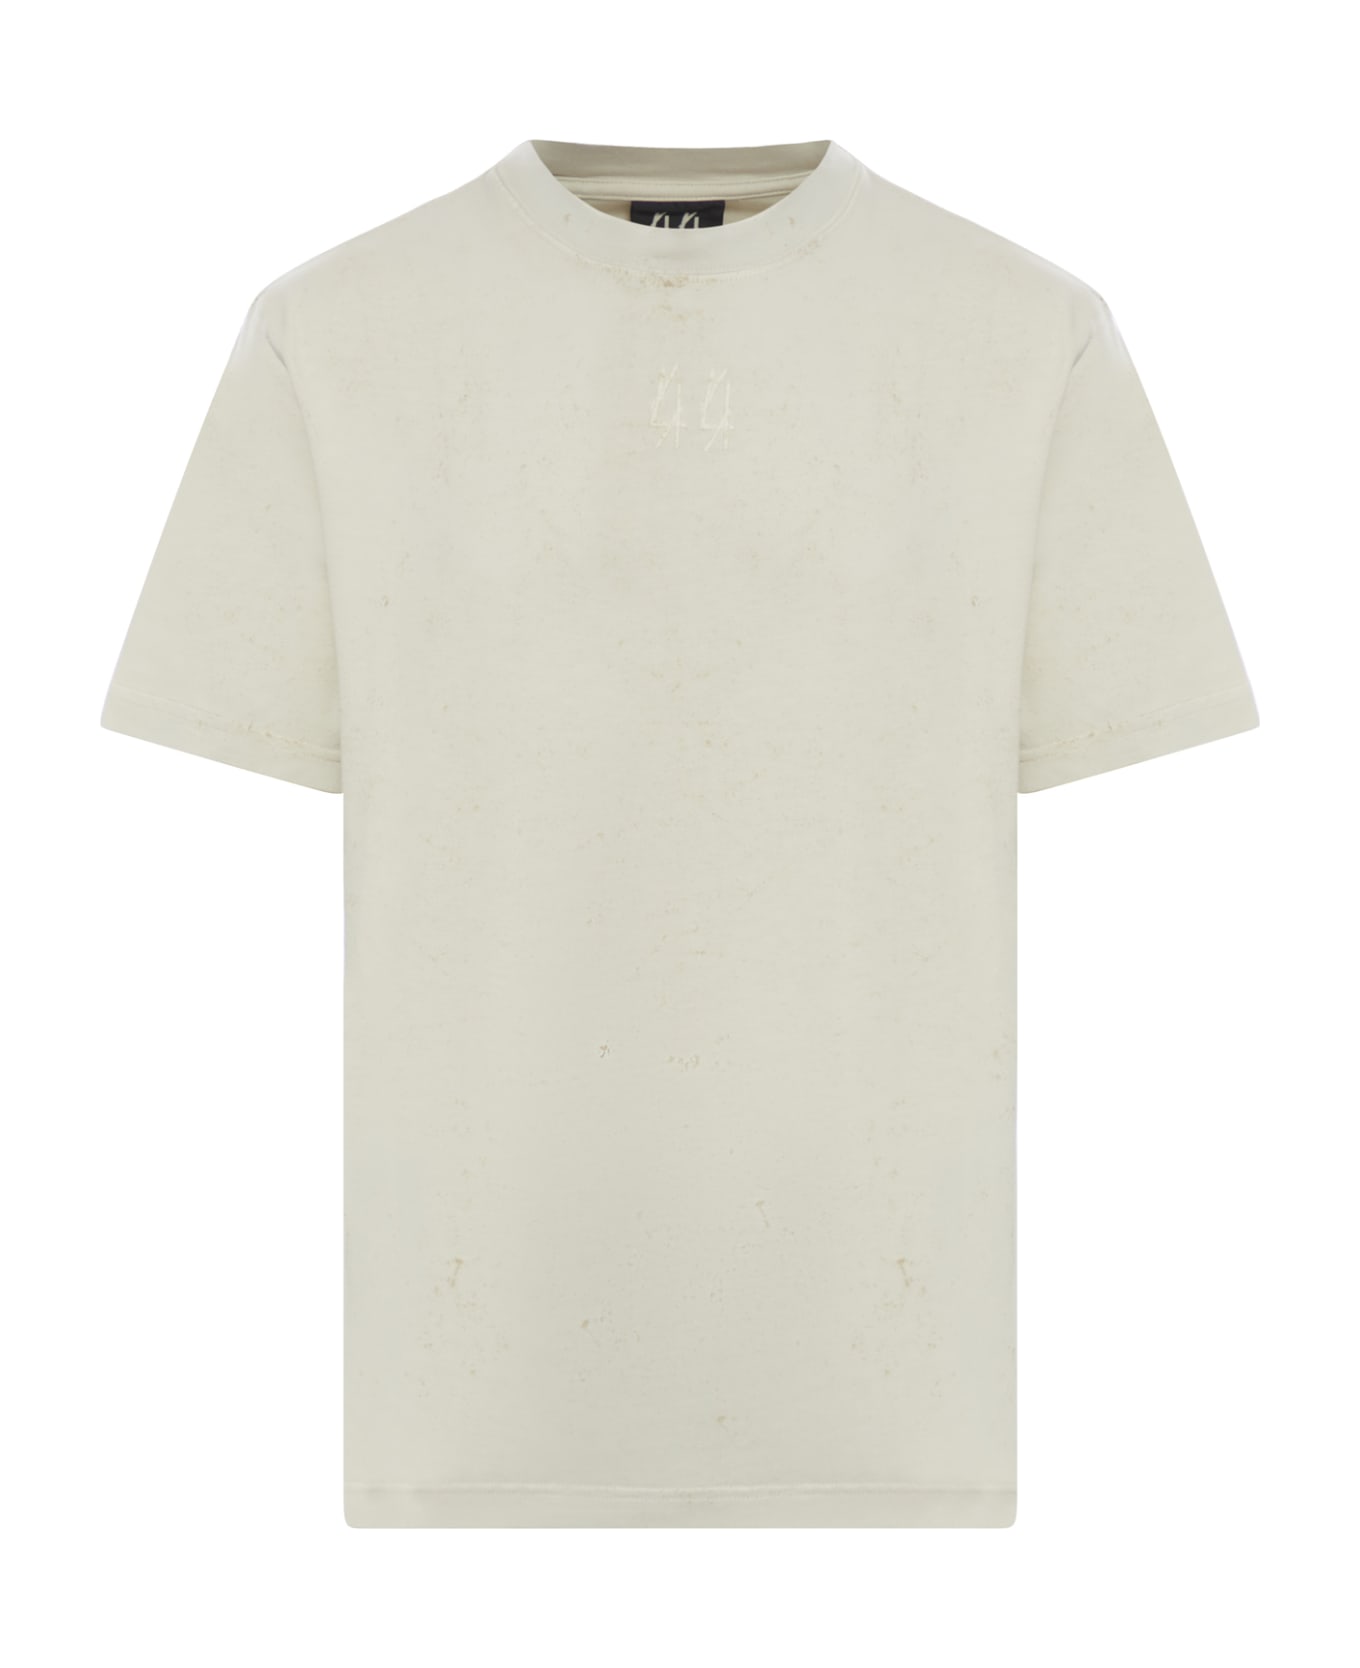 44 Label Group Trip Tee - Dirty White Gyps